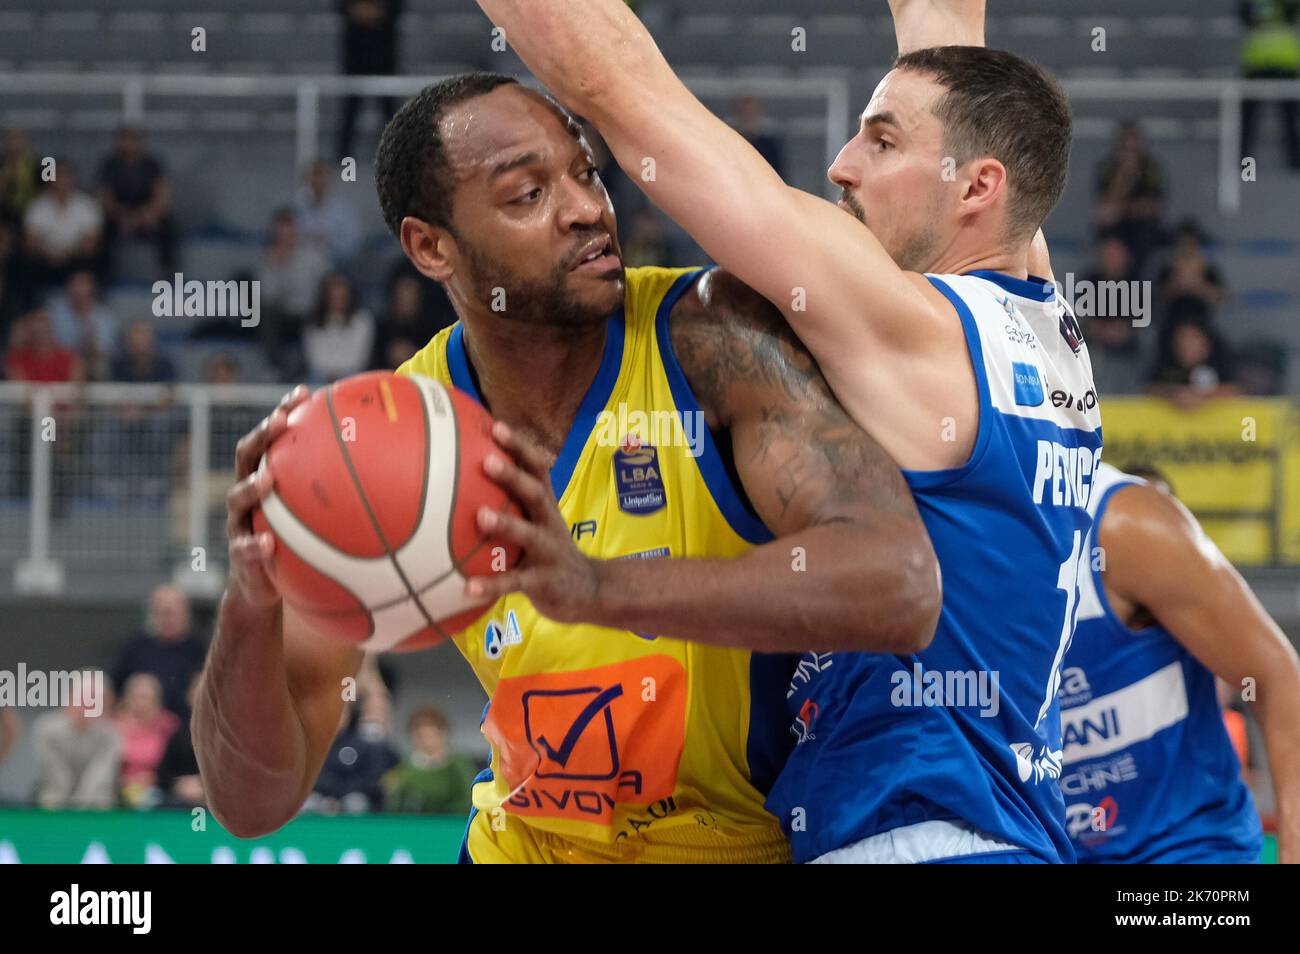 Brescia, Italy. 16th Oct, 2022. Mike Henry - Ginova Scafati and John Petrucelli - Germani Basket Brescia during Germani Basket Brescia vs Ginova Scafati, Italian Basketball A Serie Championship in Brescia, Italy, October 16 2022 Credit: Independent Photo Agency/Alamy Live News Stock Photo